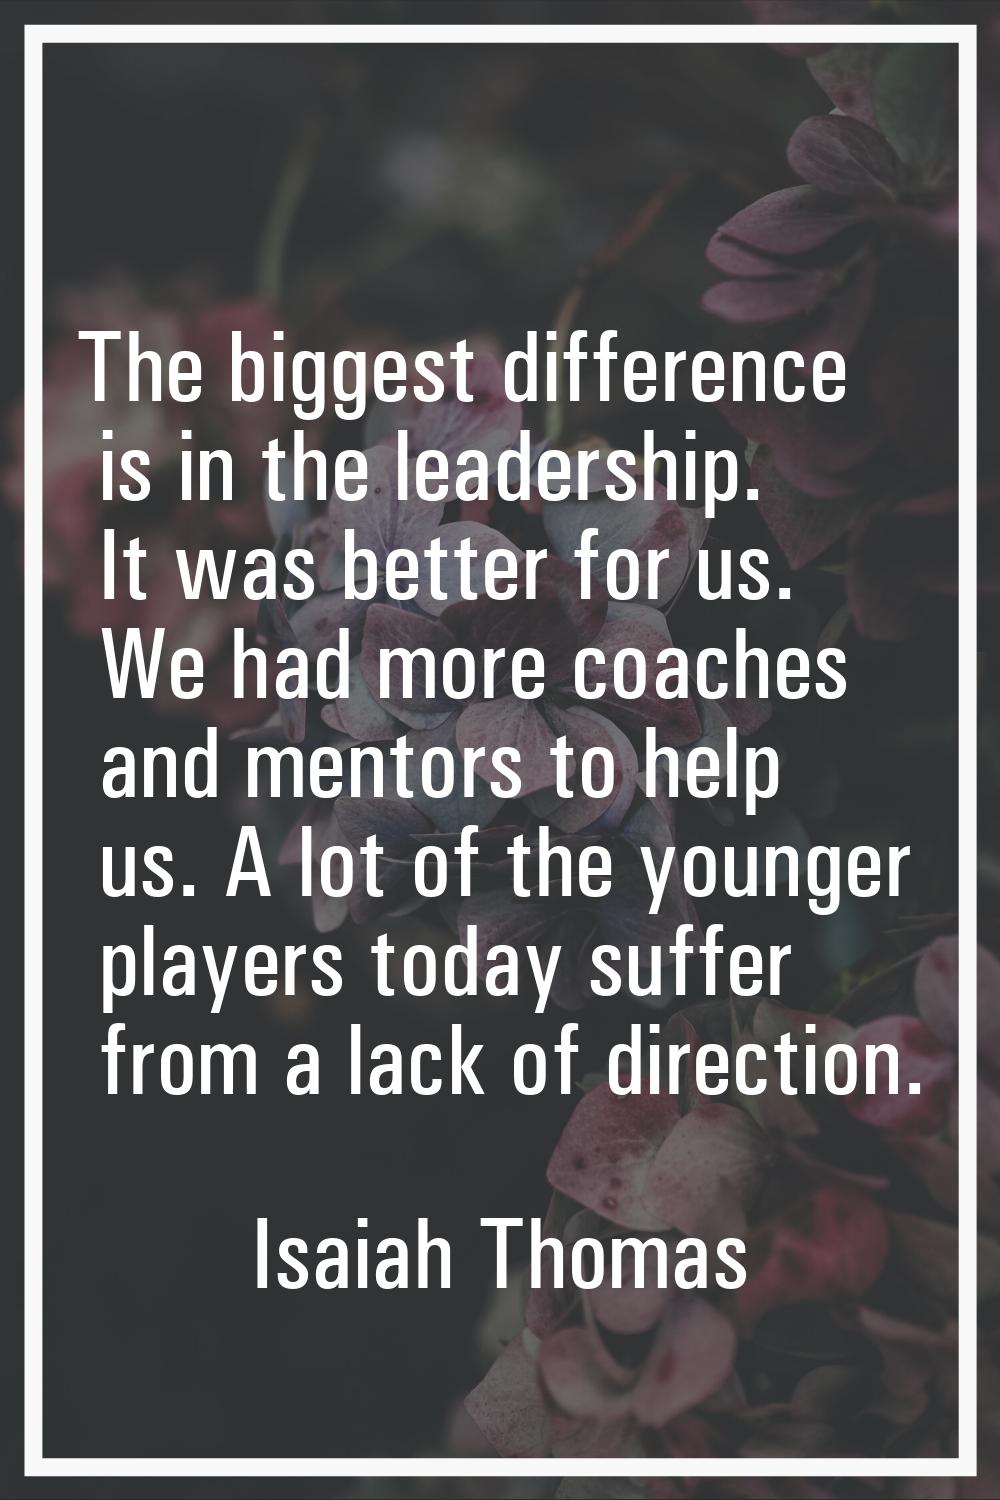 The biggest difference is in the leadership. It was better for us. We had more coaches and mentors 